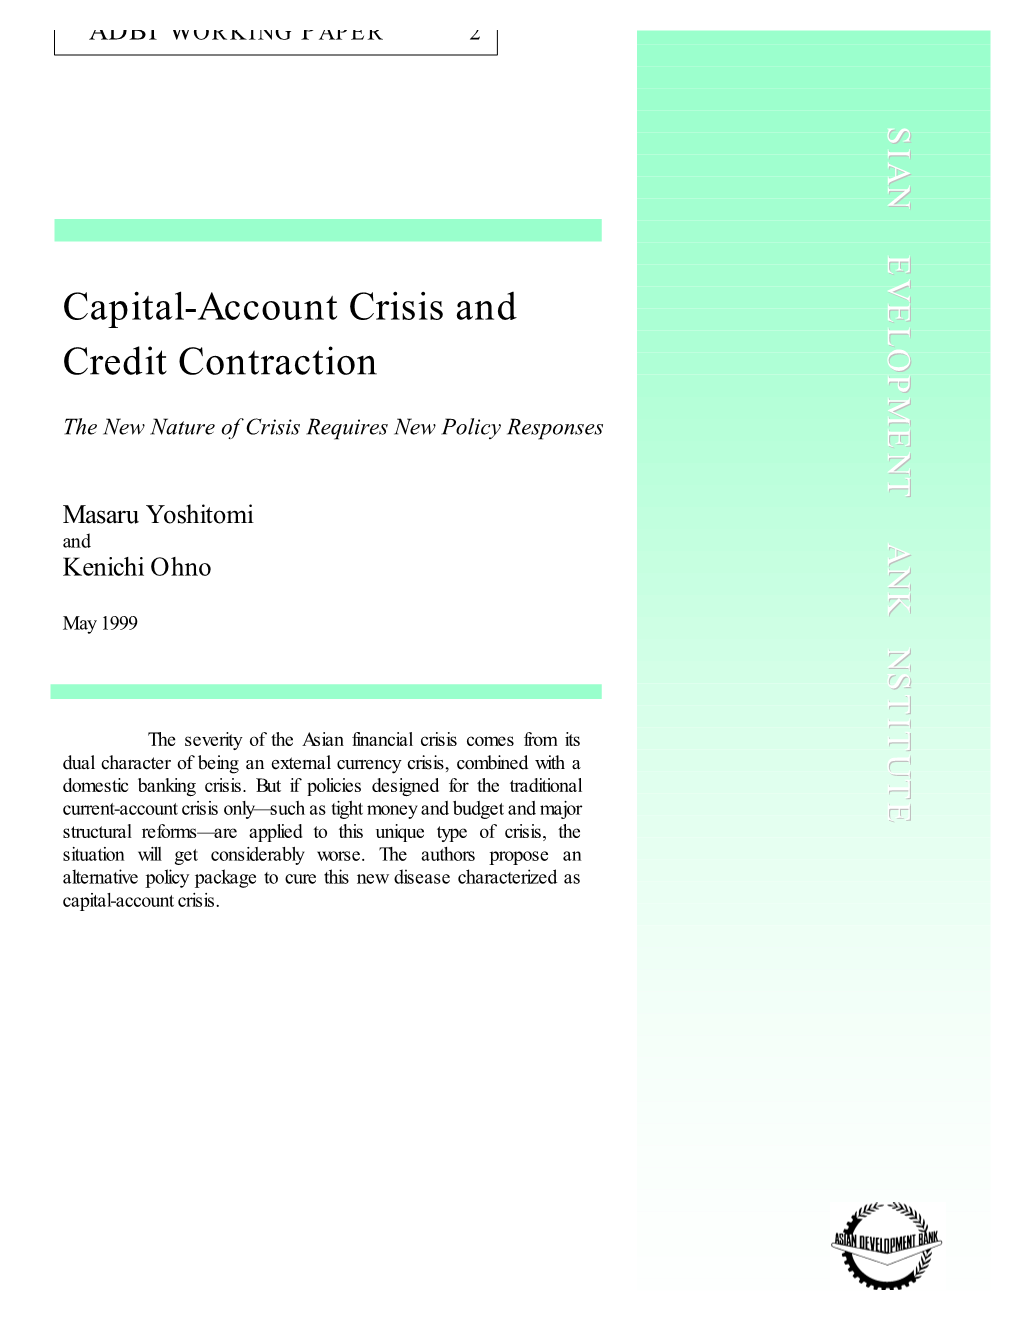 Capital-Account Crisis and Credit Contraction